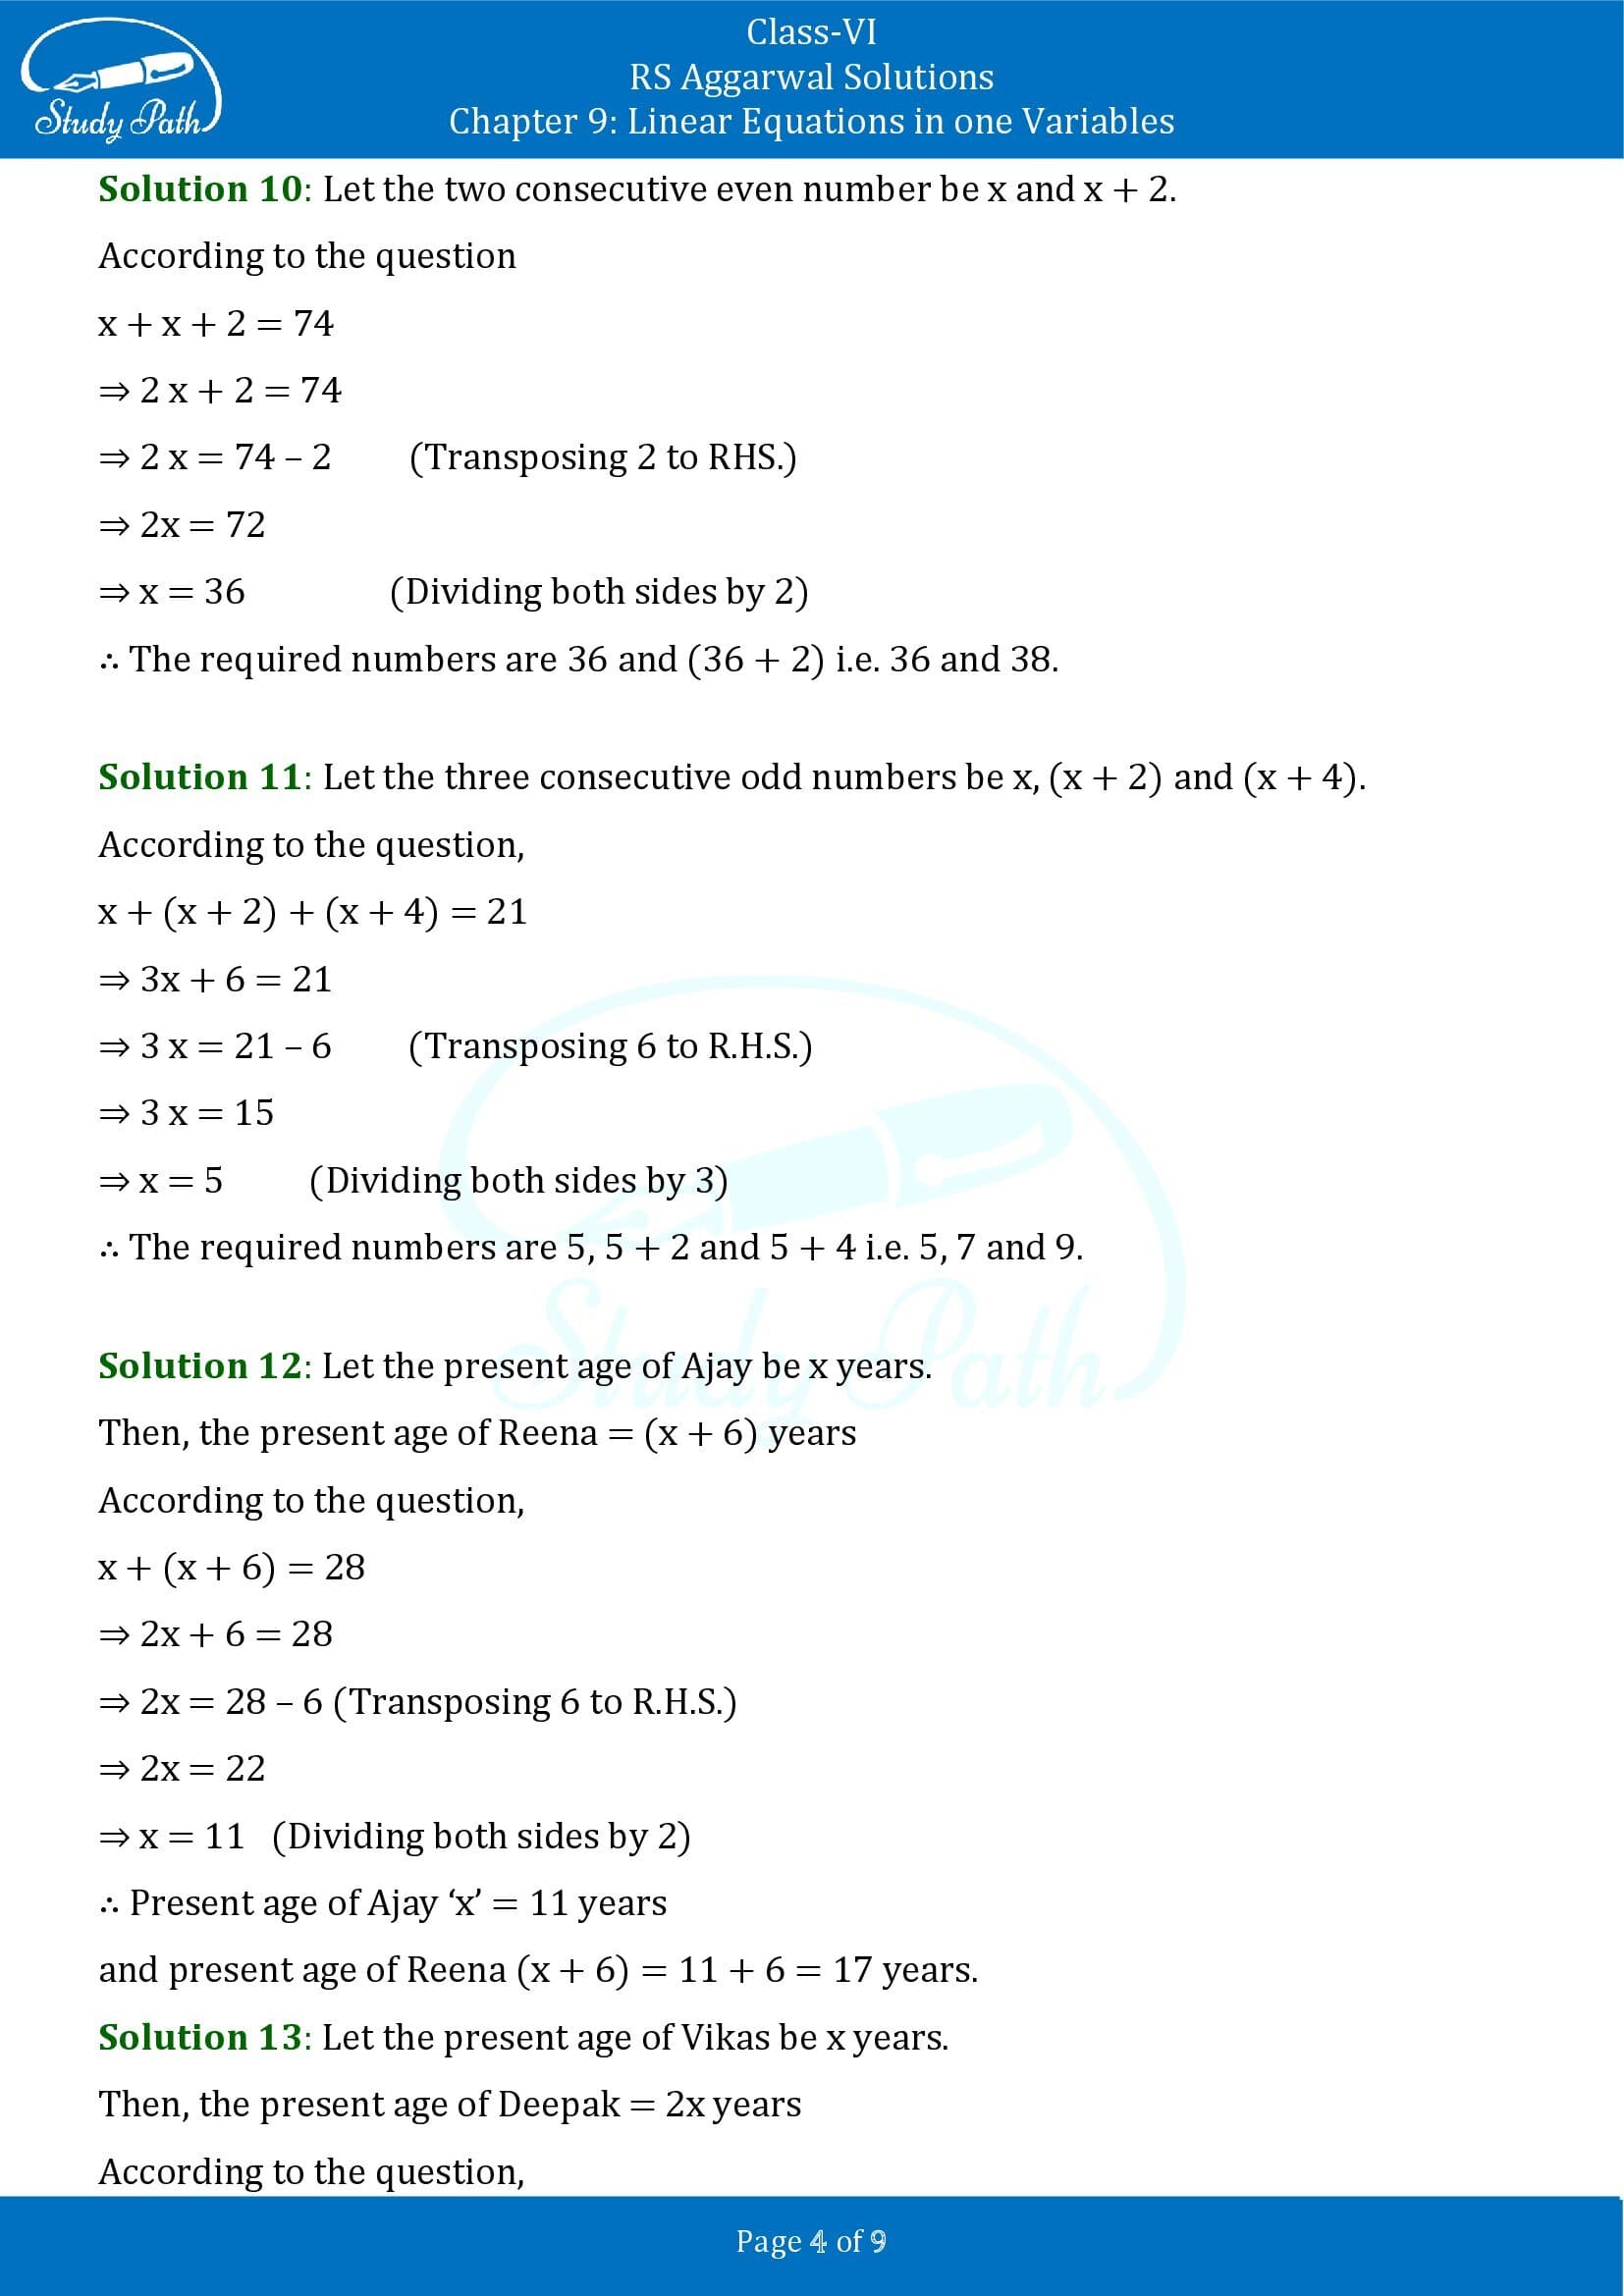 RS Aggarwal Solutions Class 6 Chapter 9 Linear Equations in One Variable Exercise 9C 00004